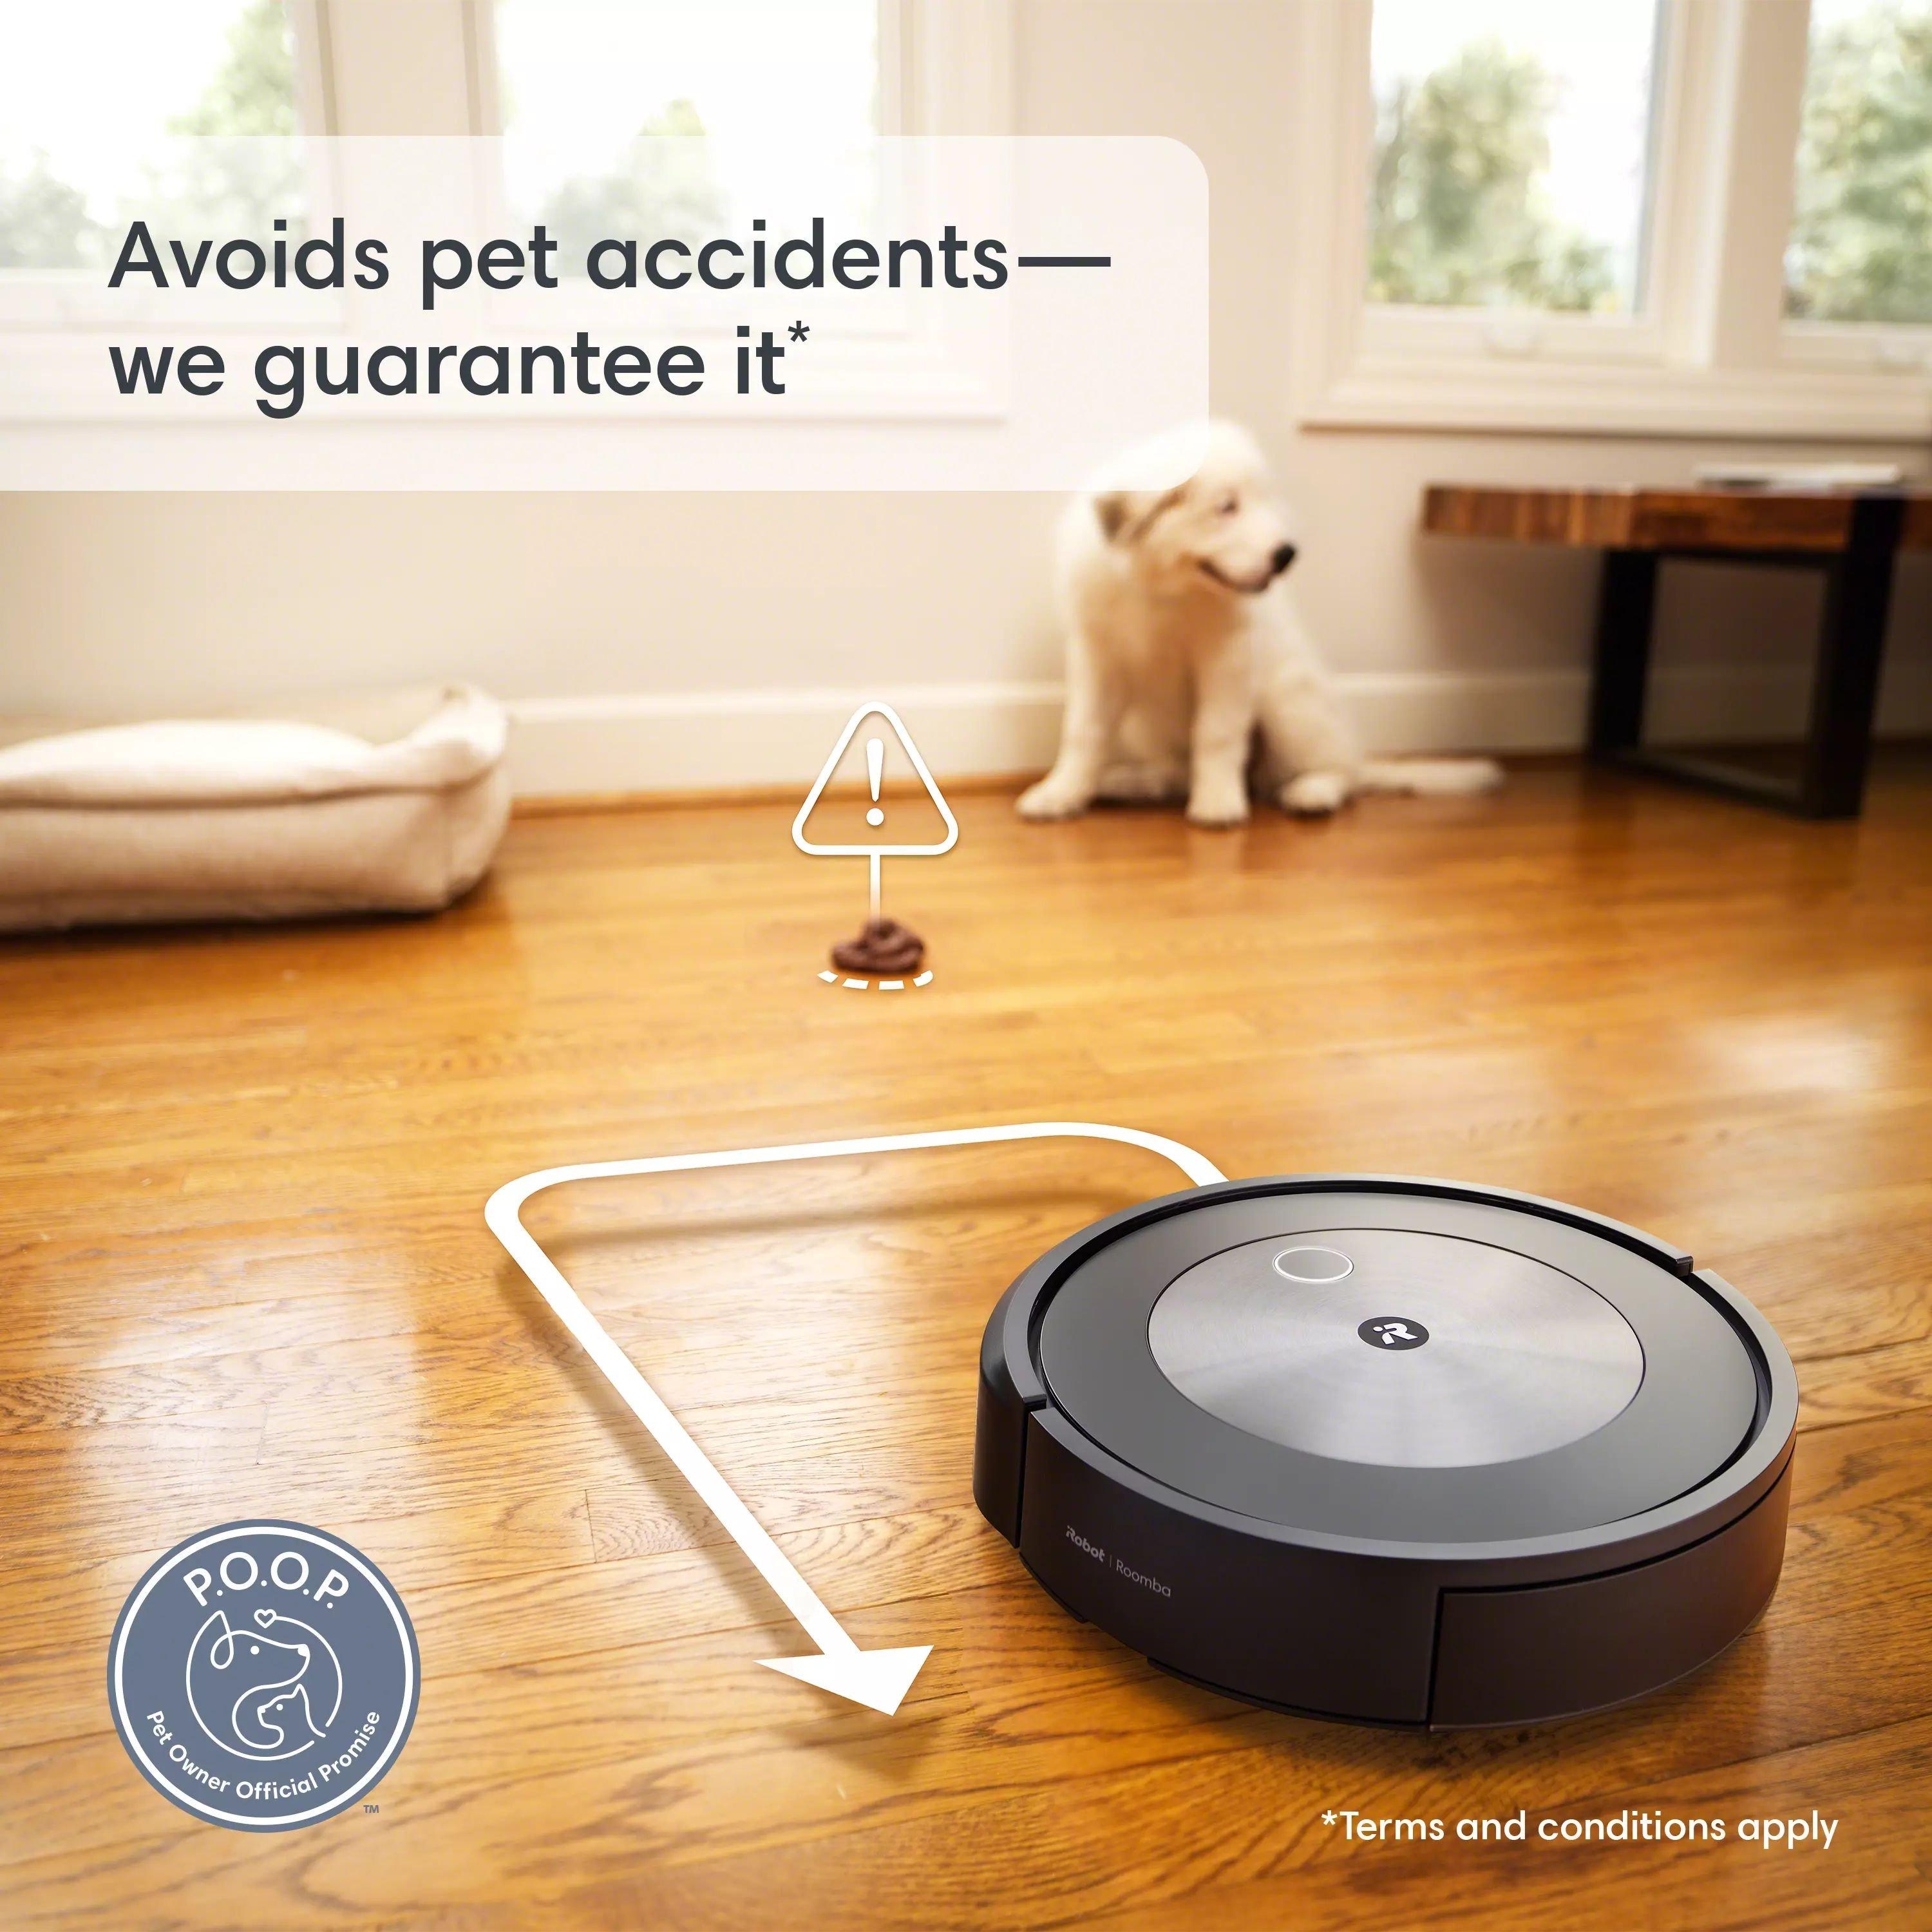 Irobot® Roomba Combo™ j7+ Self-Emptying Robot Vacuum & Mop - Automatically  vacuums and mops Without Needing to Avoid Carpets, Identifies & Avoids